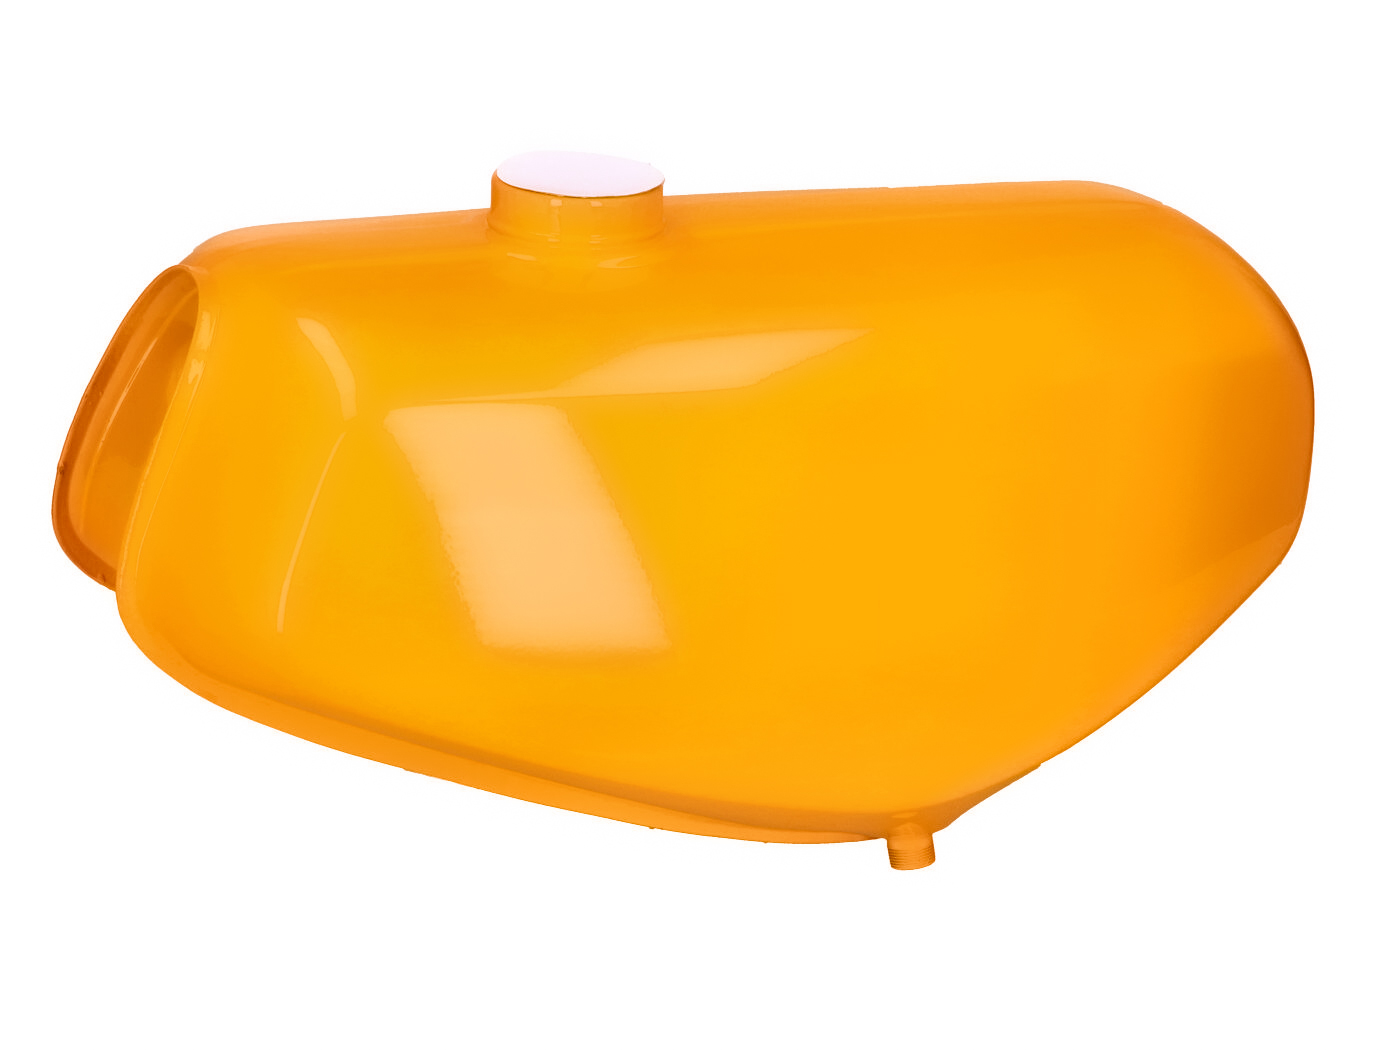 Fuel tank & side cover Sahara for Simson S50, S51, S70, Scooter Parts, Racing Planet USA